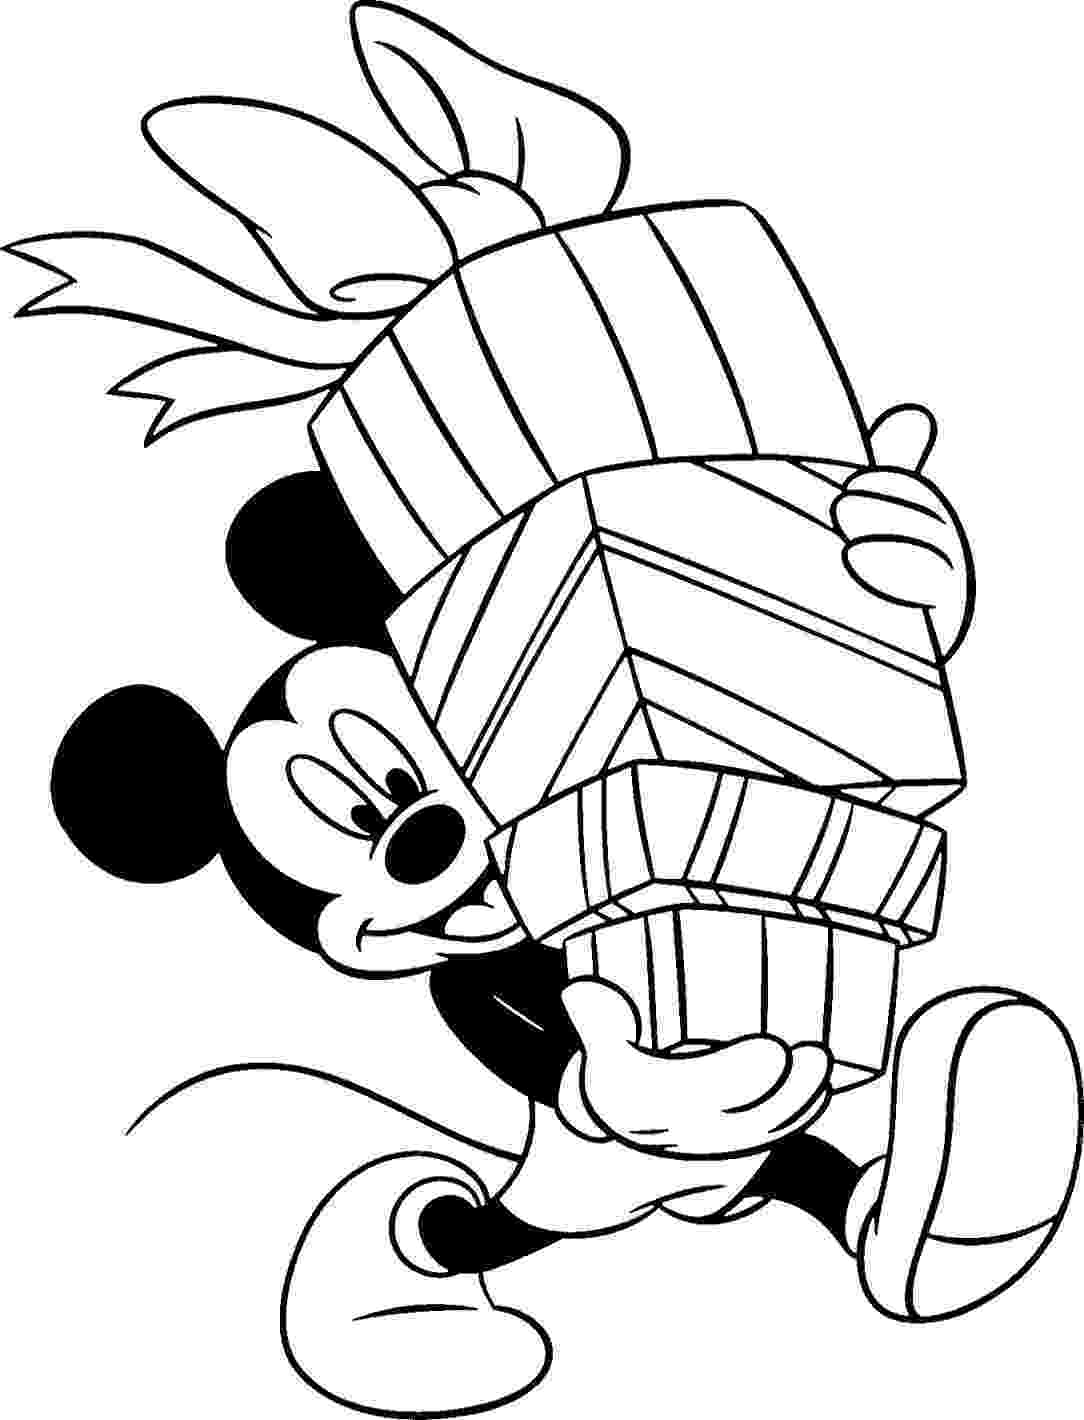 mickey mouse birthday coloring pages transmissionpress birthday coloring pages birthday mouse mickey pages coloring 